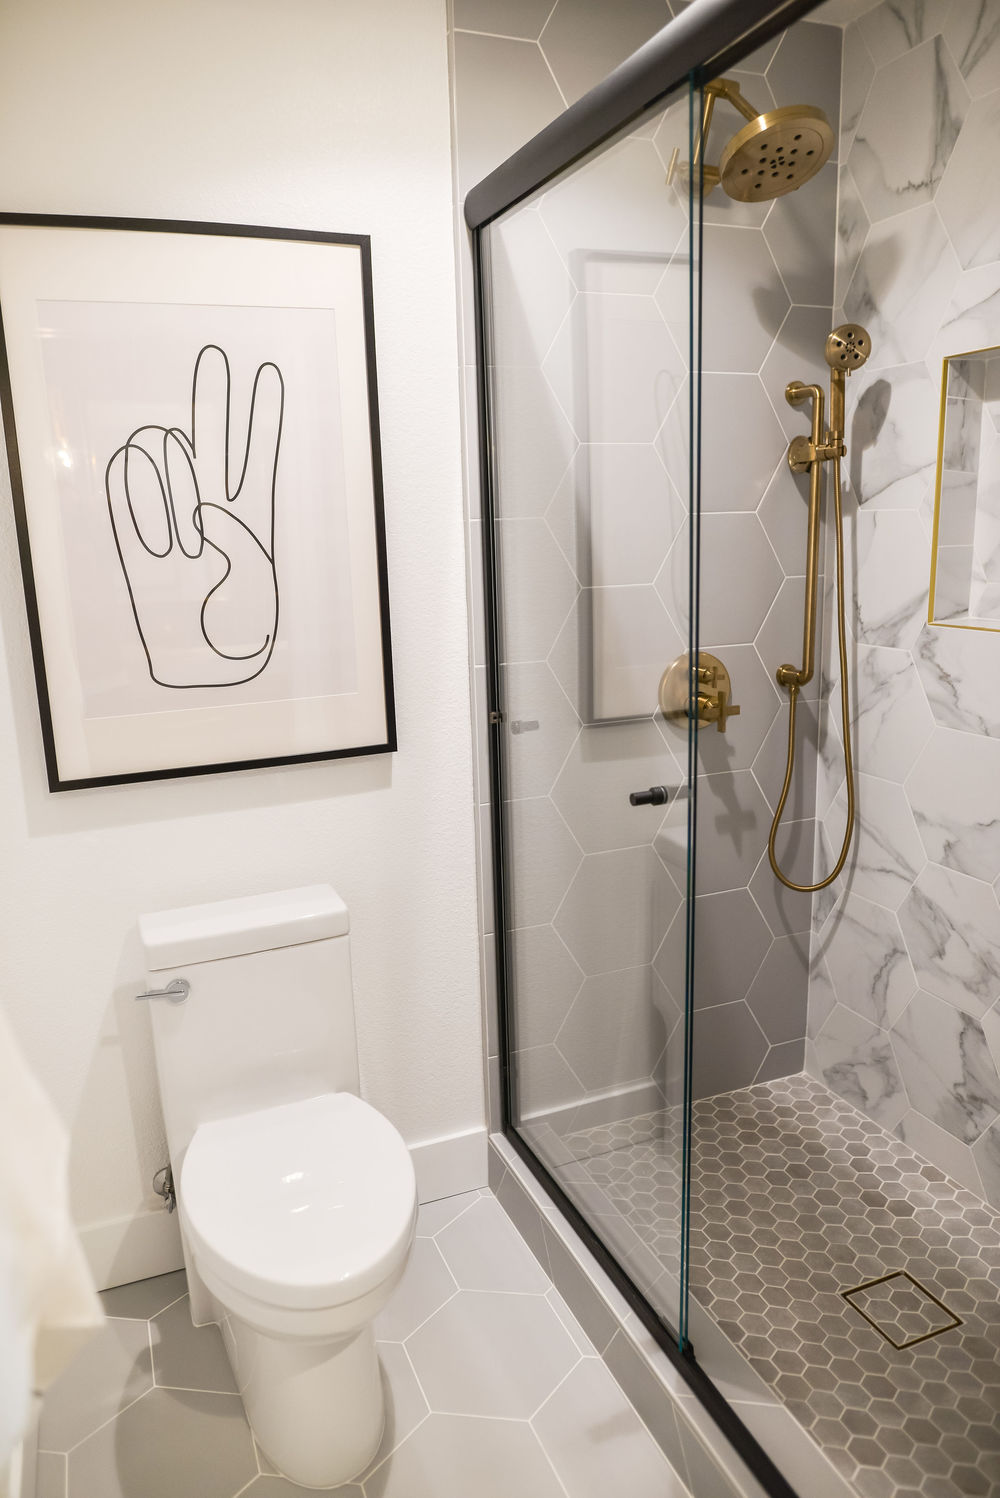 Outdated guest bathroom gets a much needed makeover with a designer’s touch